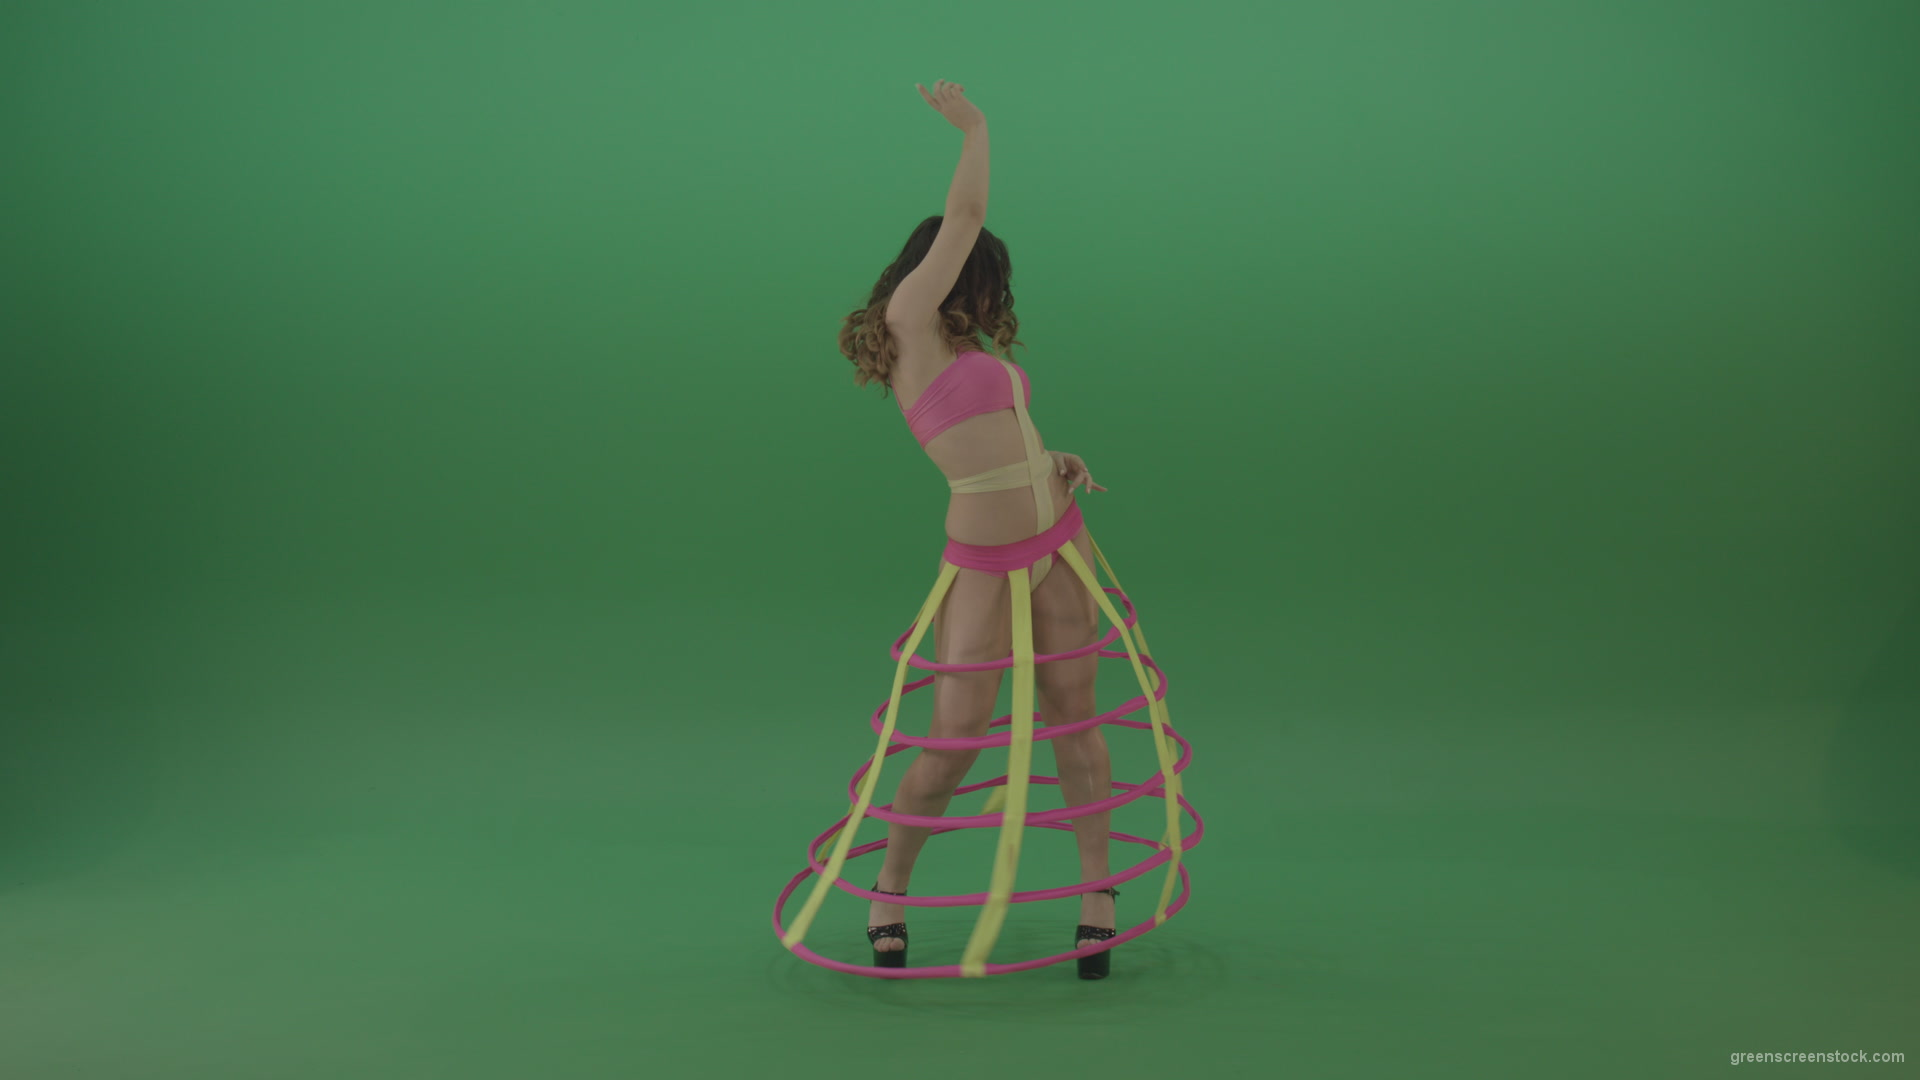 With-a-beautiful-appearance-brunette-in-an-extraordinary-costume-dancing-on-green-screen_002 Green Screen Stock